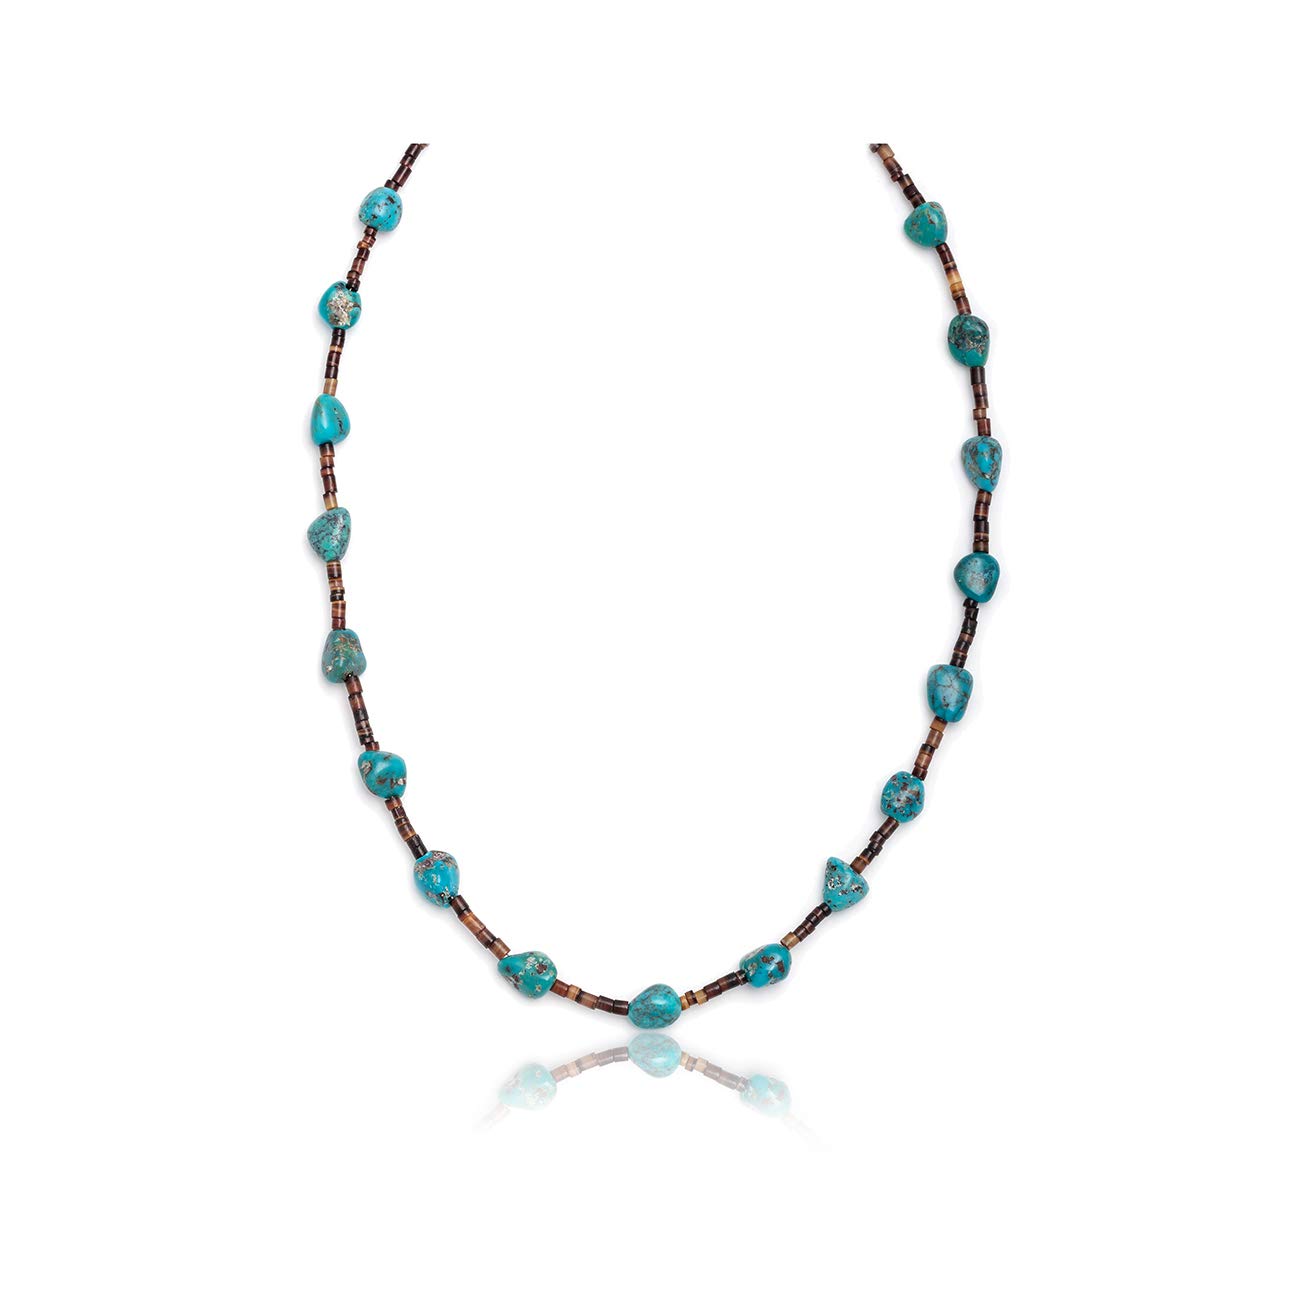 $230Tag Silver Certified Navajo Native American Natural Turquoise Necklace 15883-2 Made by Loma Siiva